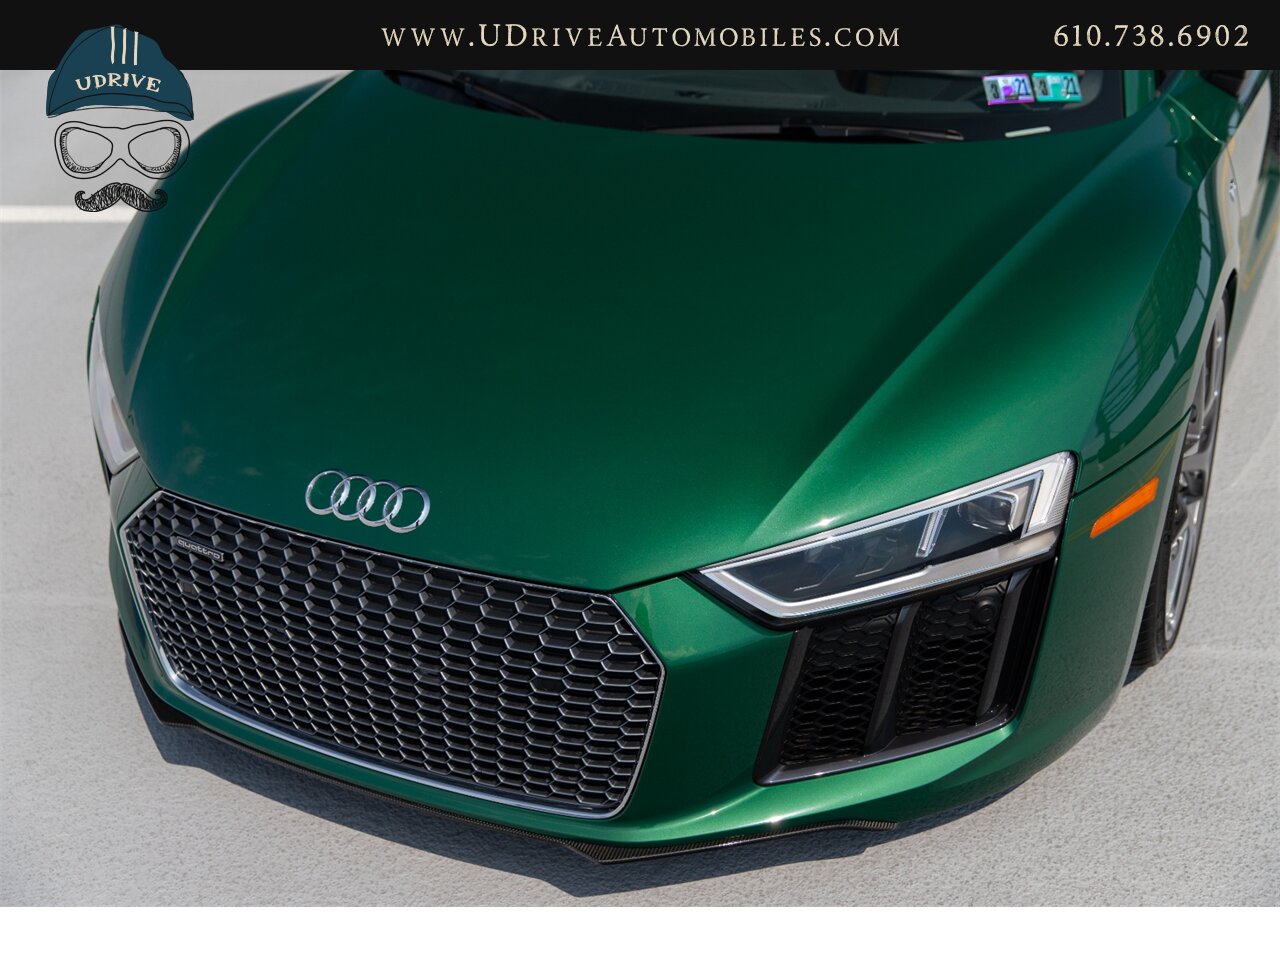 2017 Audi R8 Audi Exclusive Avocado Green Vermont Brown Leather  Diamond Stitching V10 Carbon Fiber - Photo 12 - West Chester, PA 19382